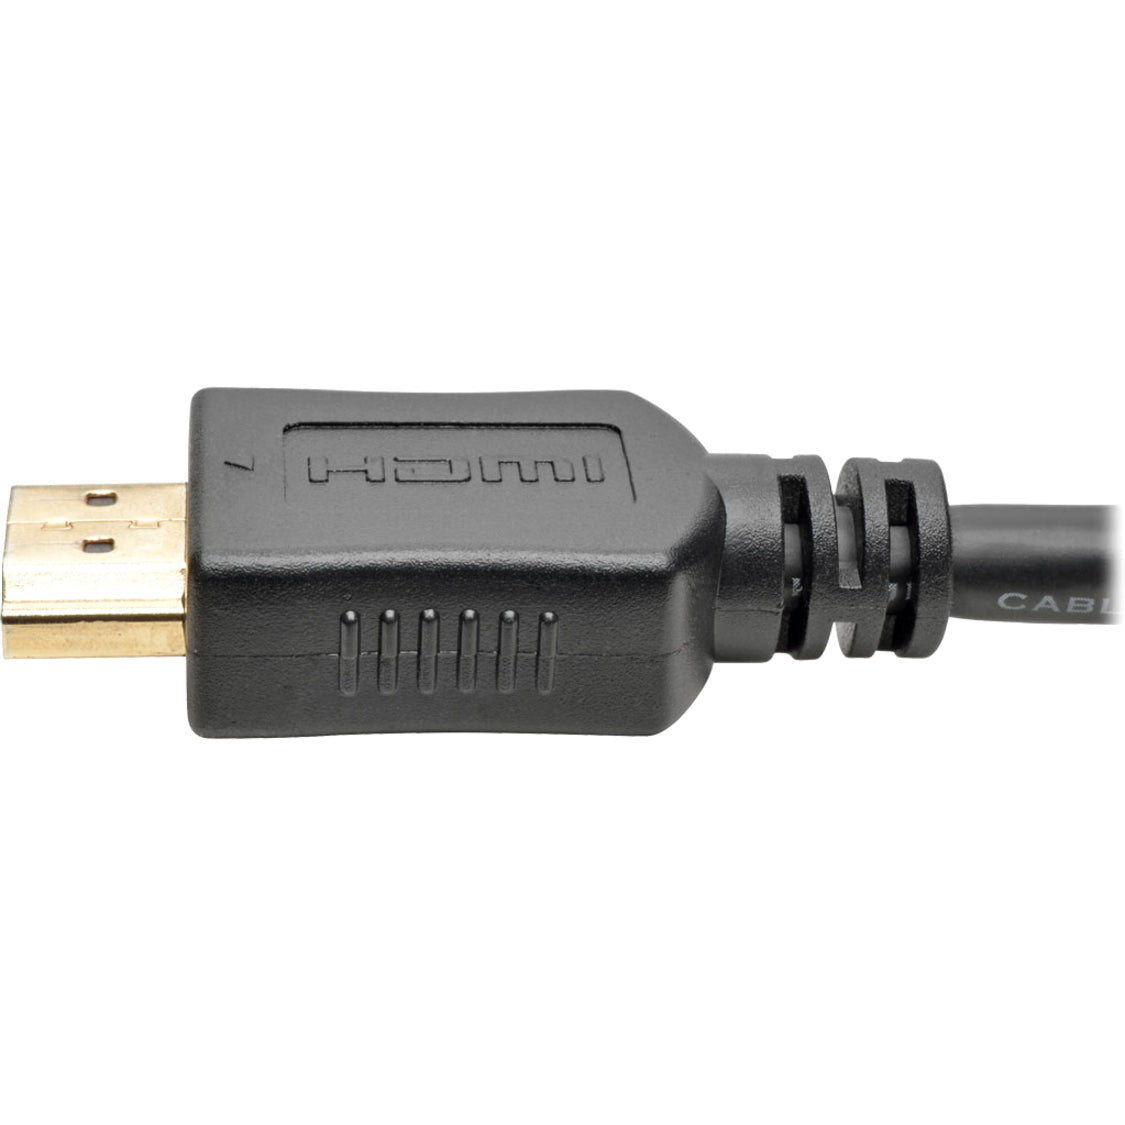 Tripp Lite P566-015-VGA HDMI/VGA Audio/Video Cable, 15 ft, Active, Gold Plated